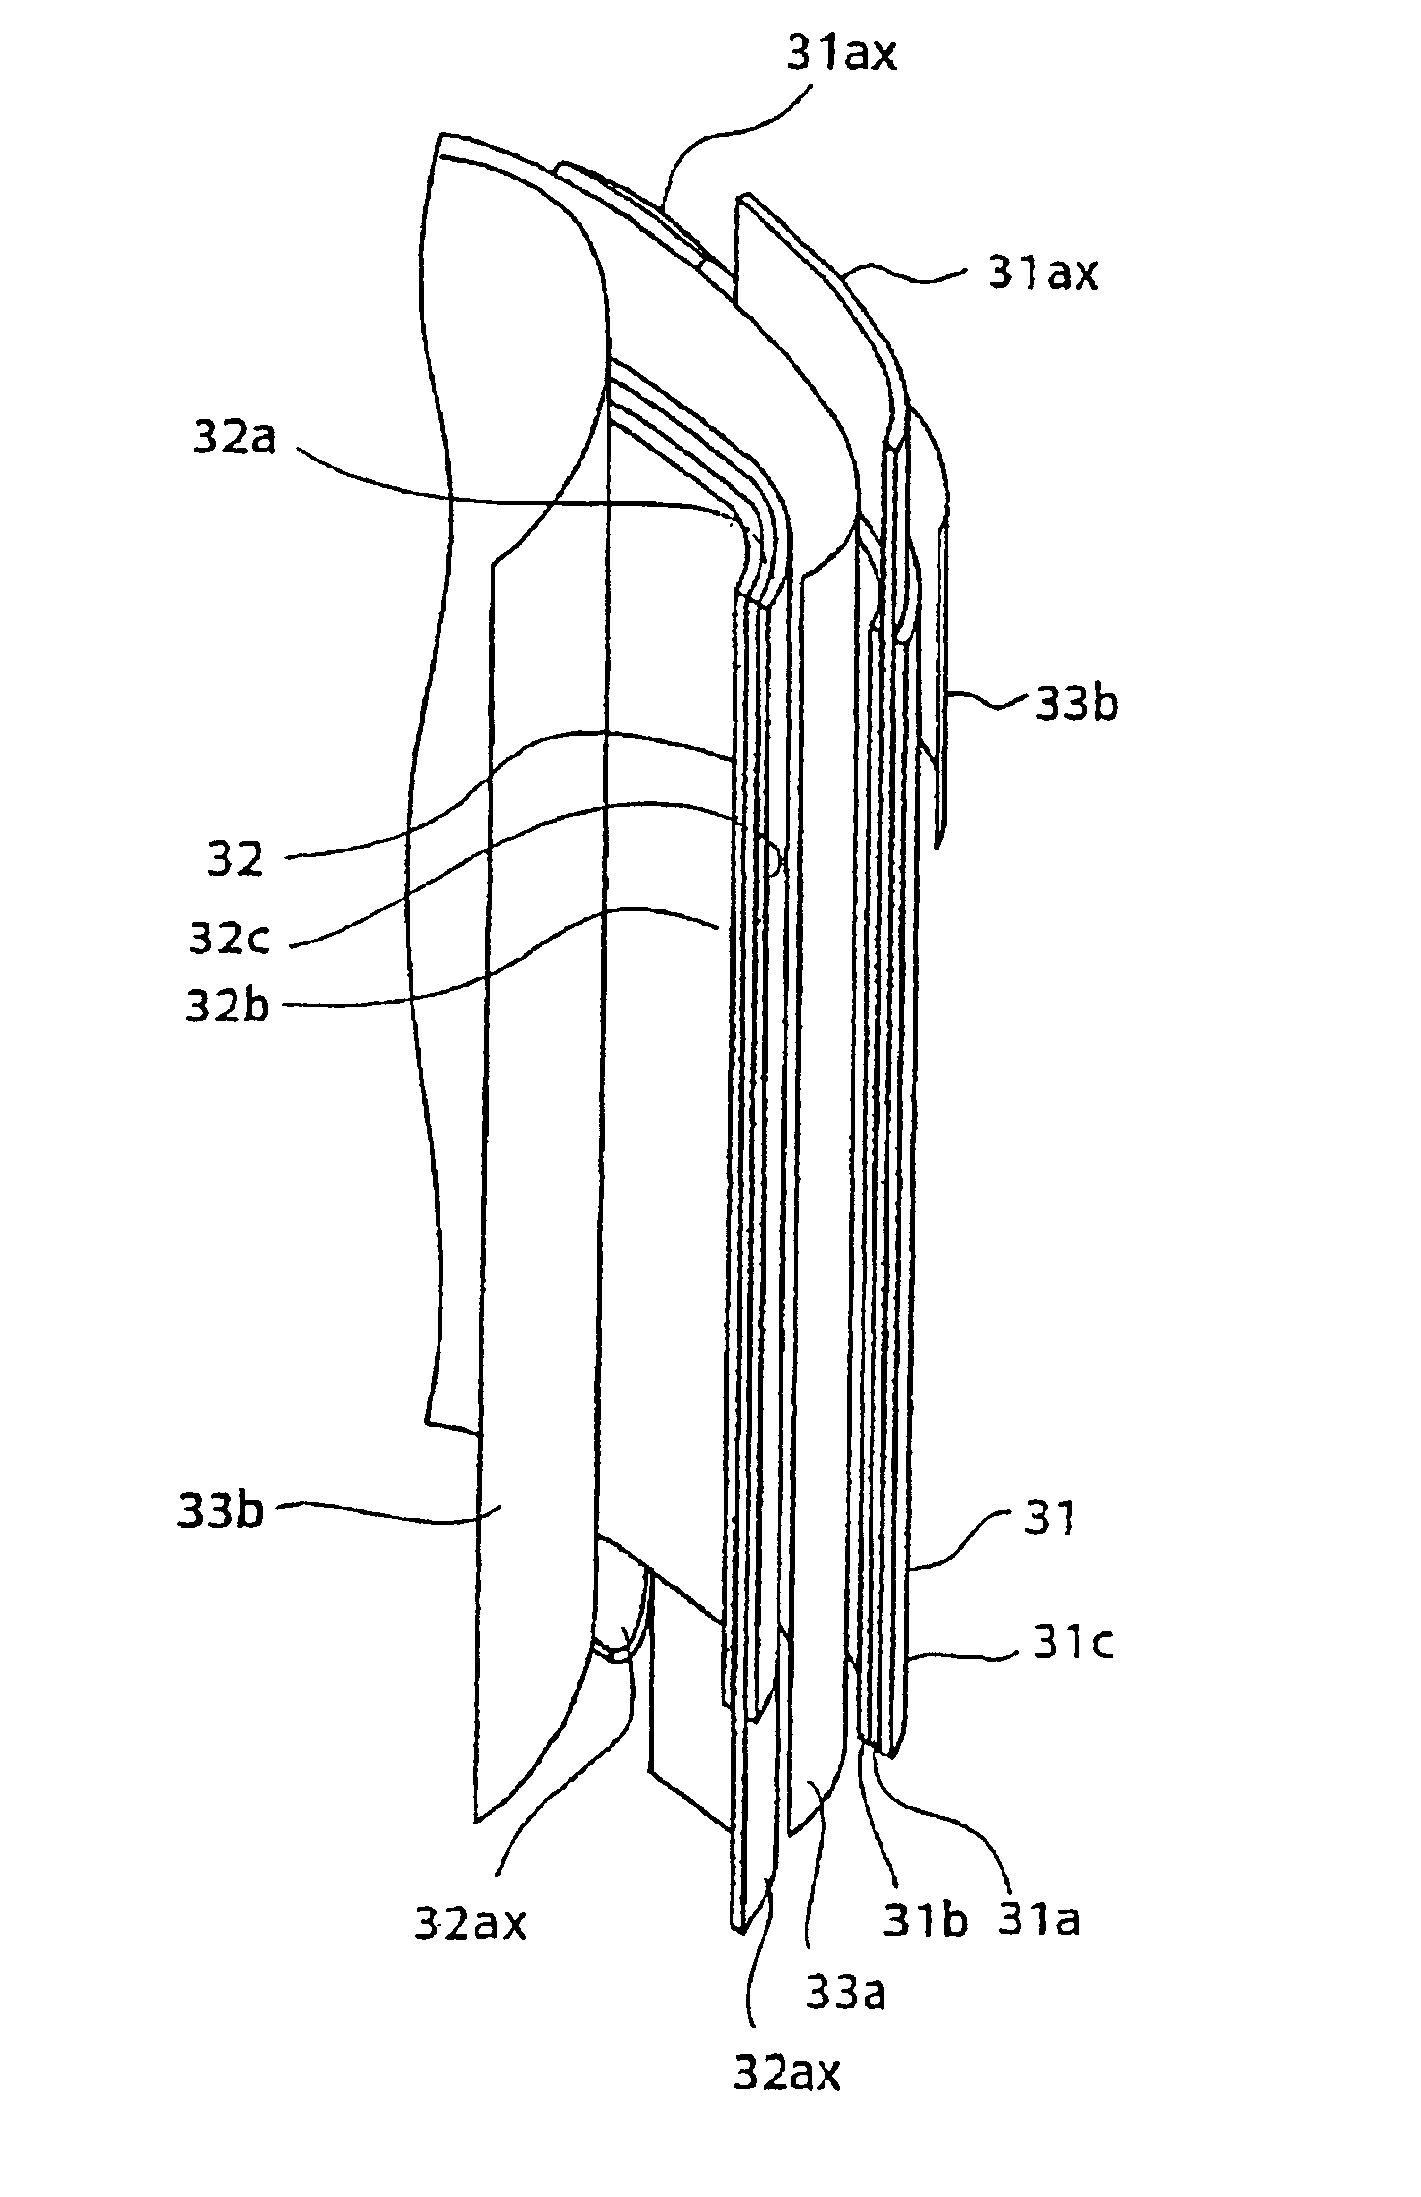 Electrochemical device comprising a pair of electrodes and an electrolyte